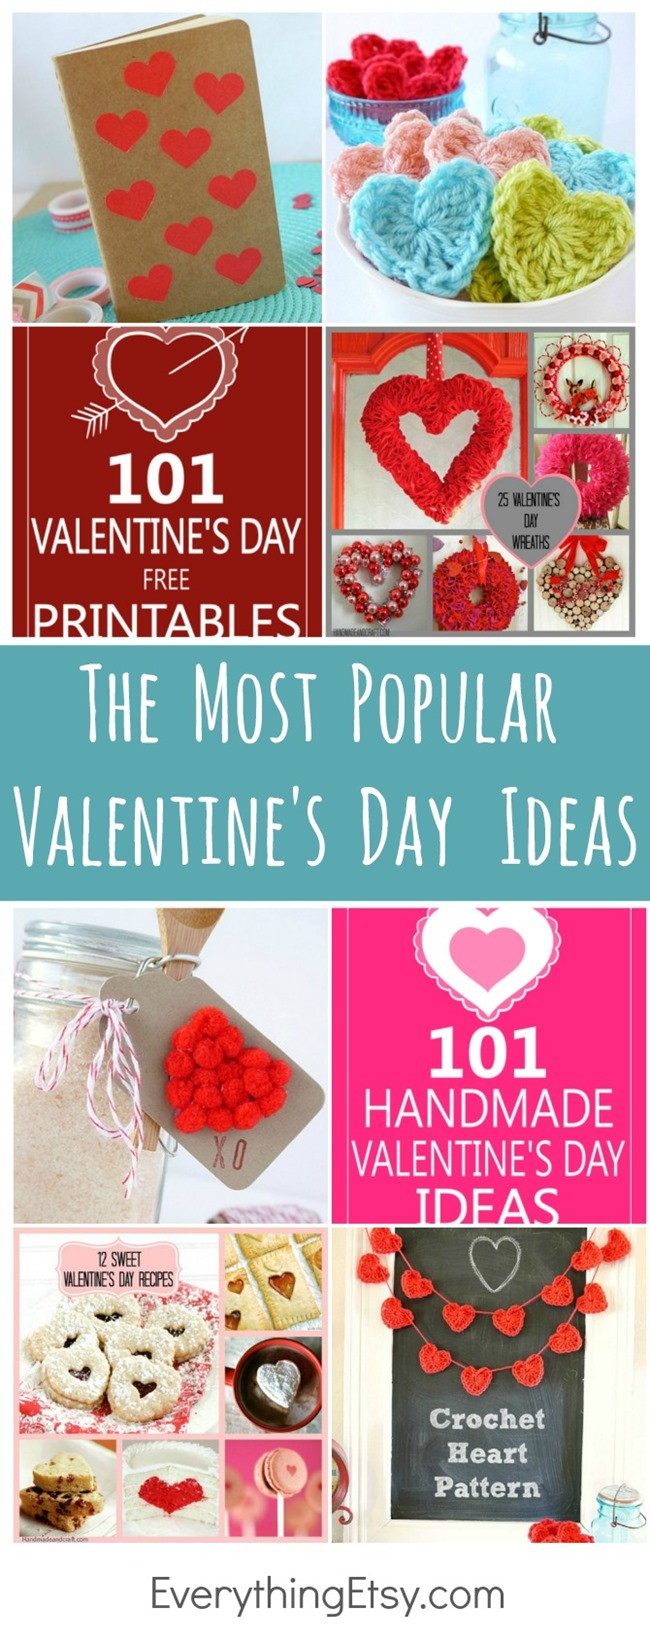 The Most Popular Valentine's Day Ideas and Printables on EverythingEtsy.com